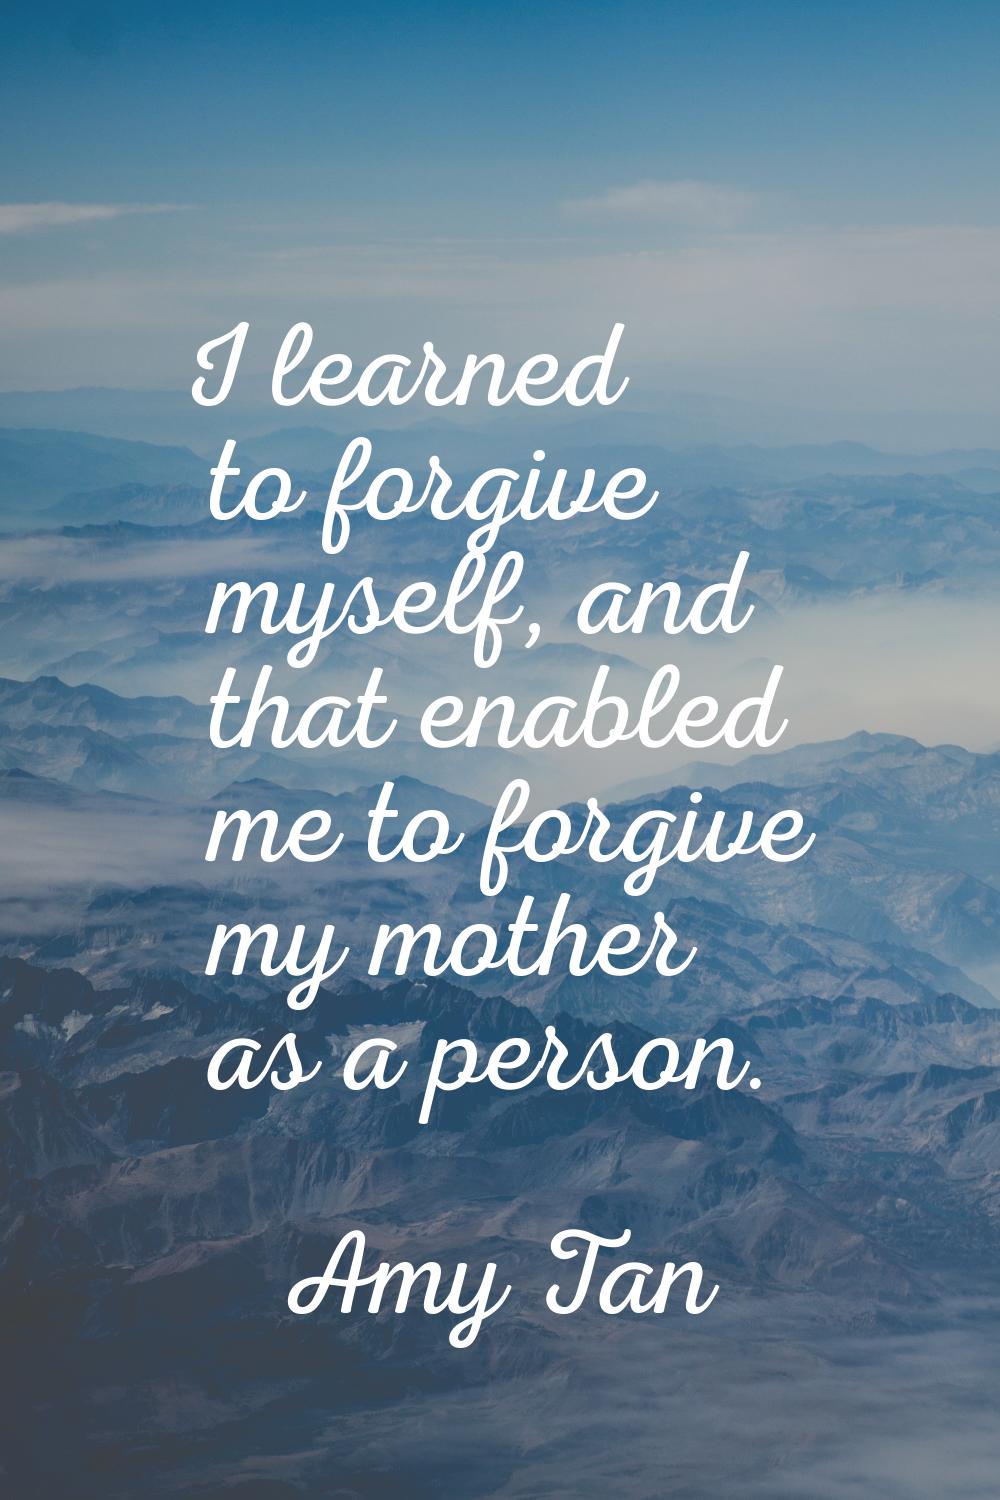 I learned to forgive myself, and that enabled me to forgive my mother as a person.